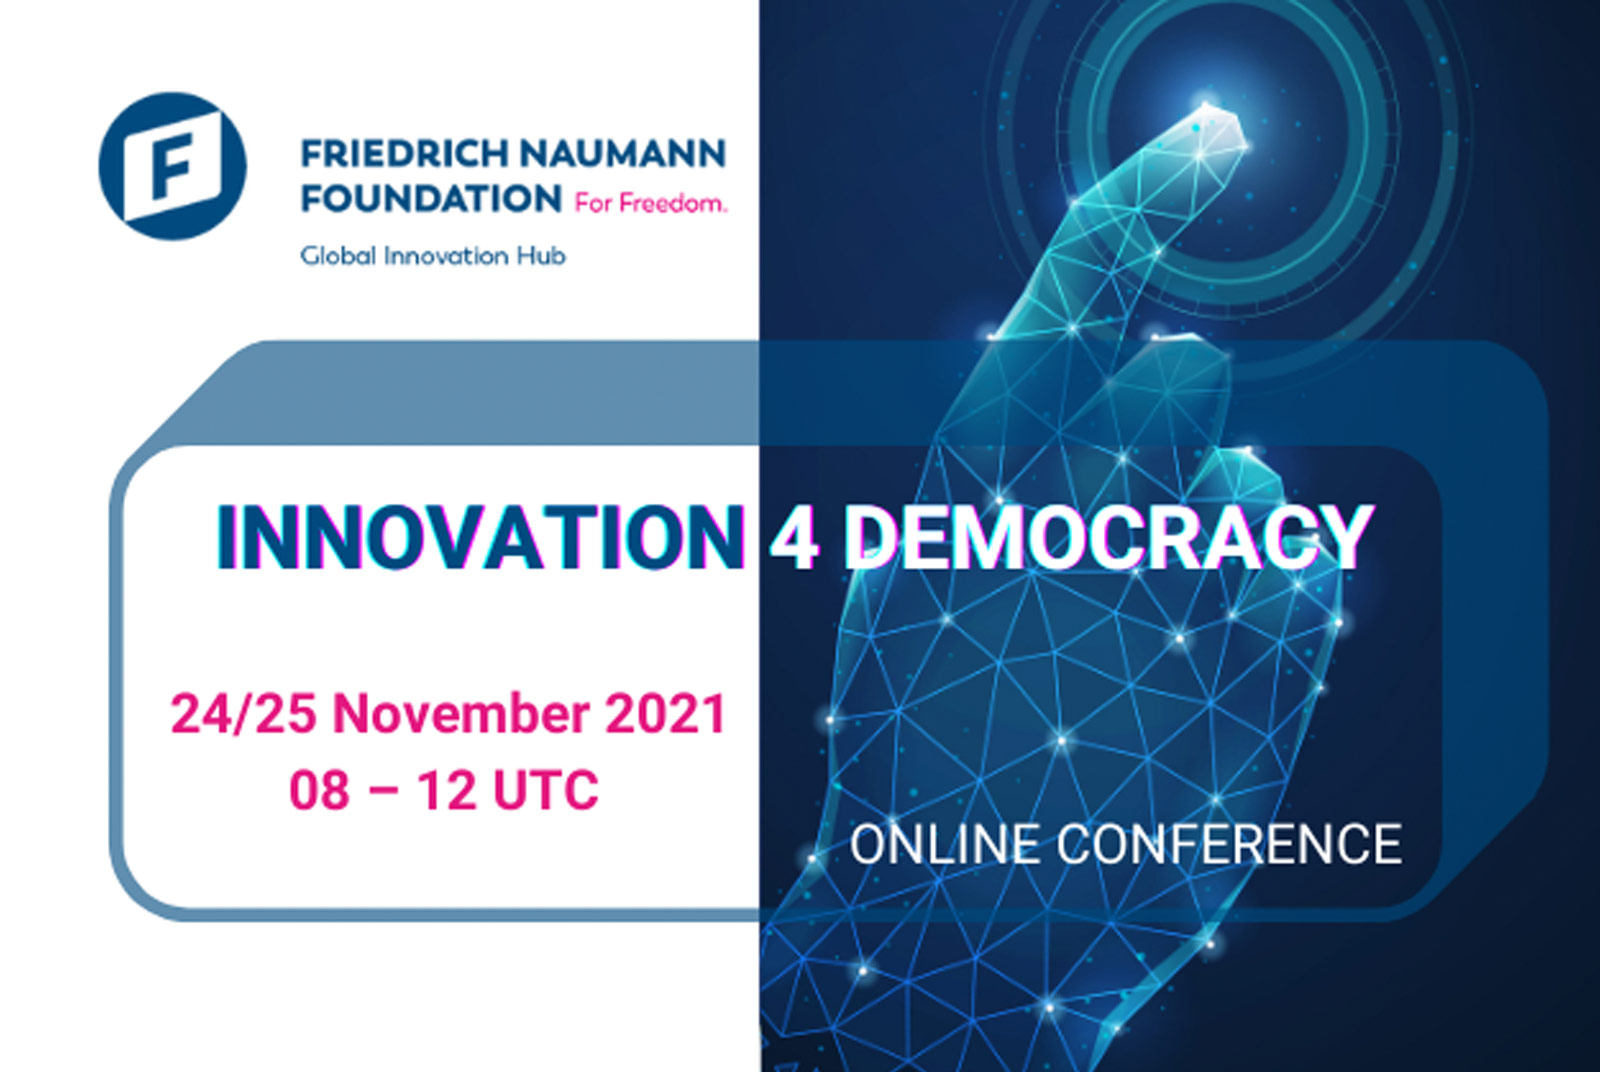 Innovation for democracy – that is why we are here